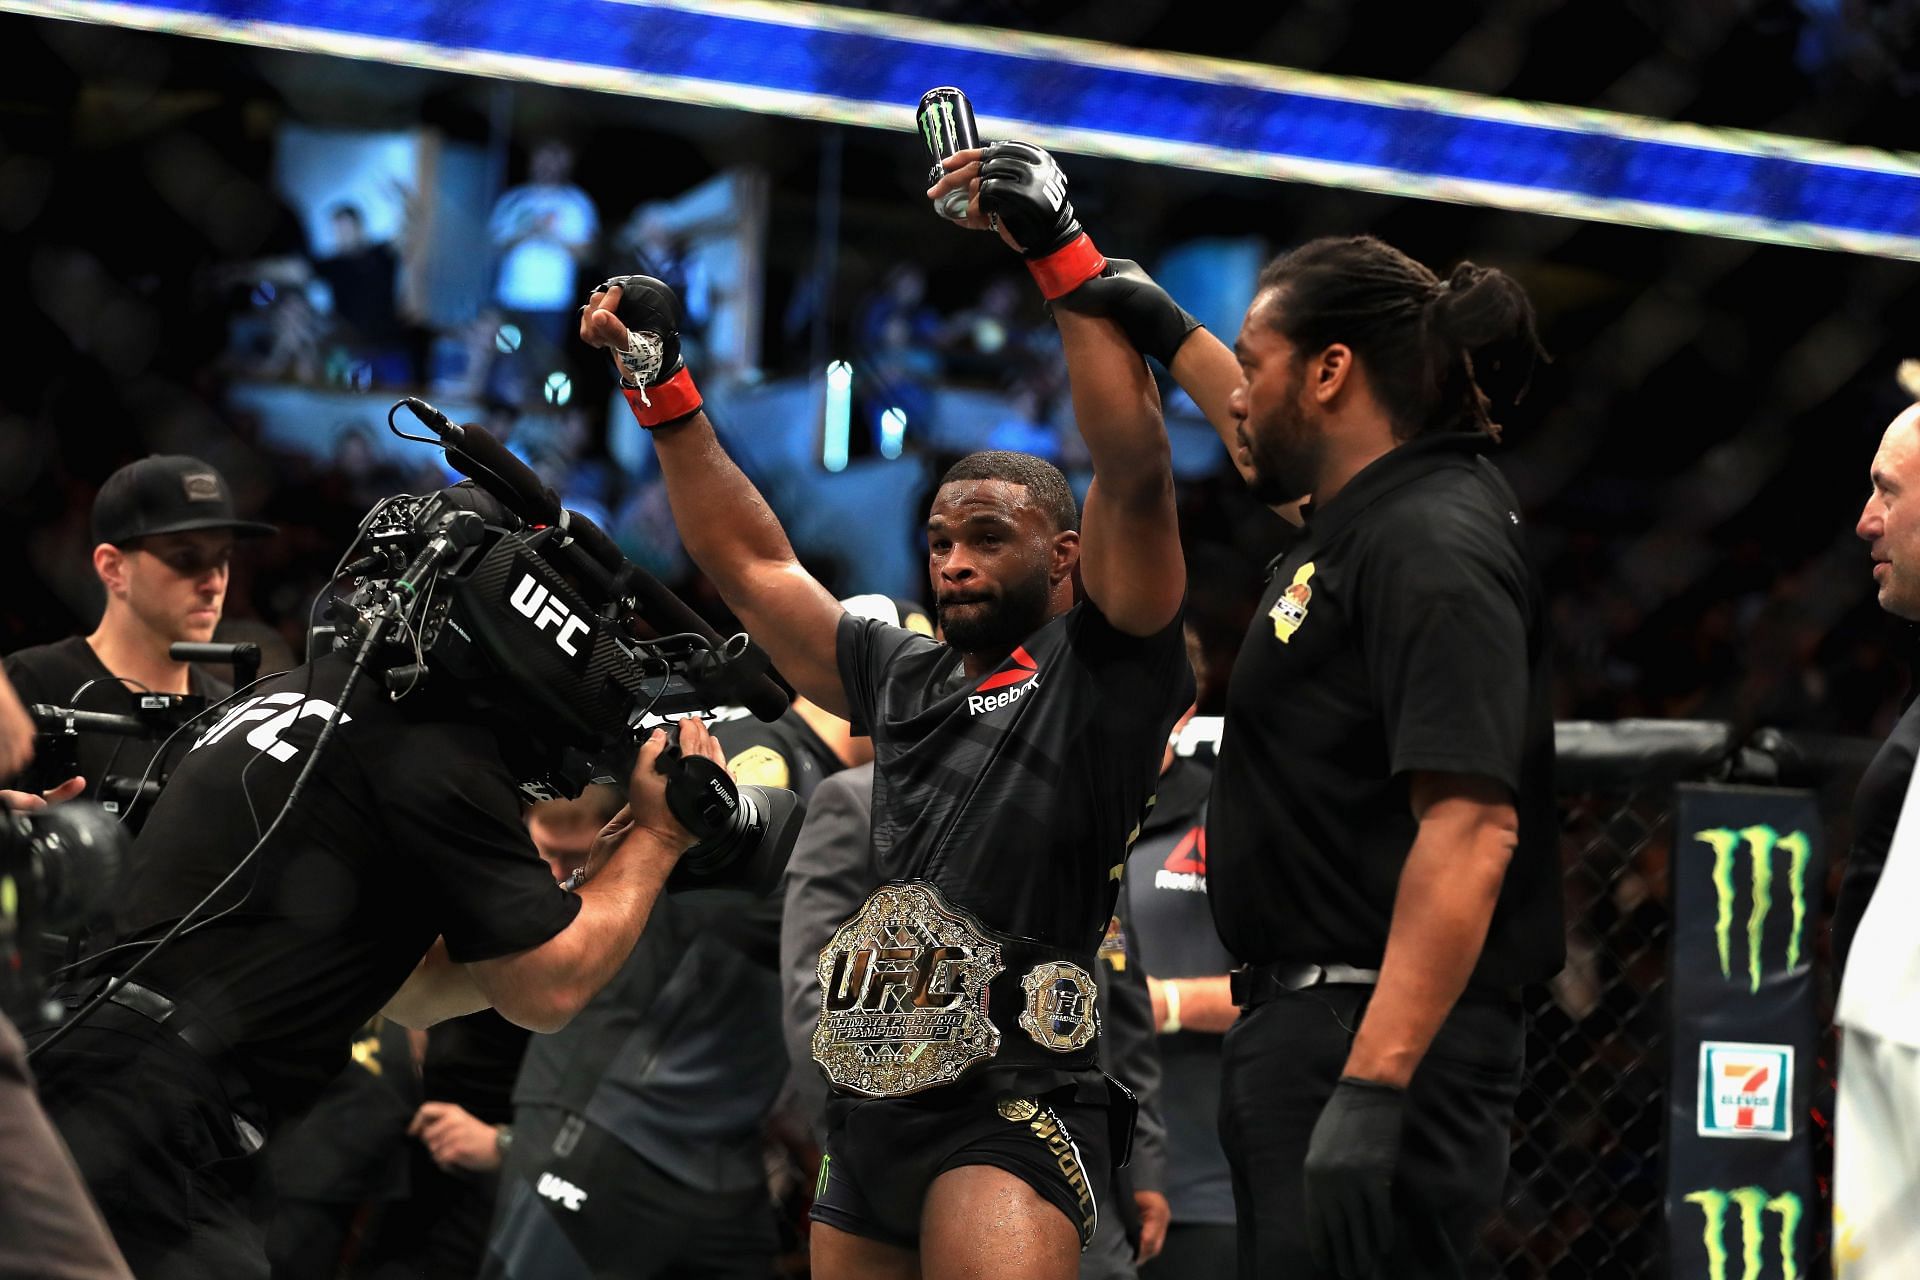 Despite a reputation for dull fights, Tyron Woodley was remarkably successful as welterweight champion